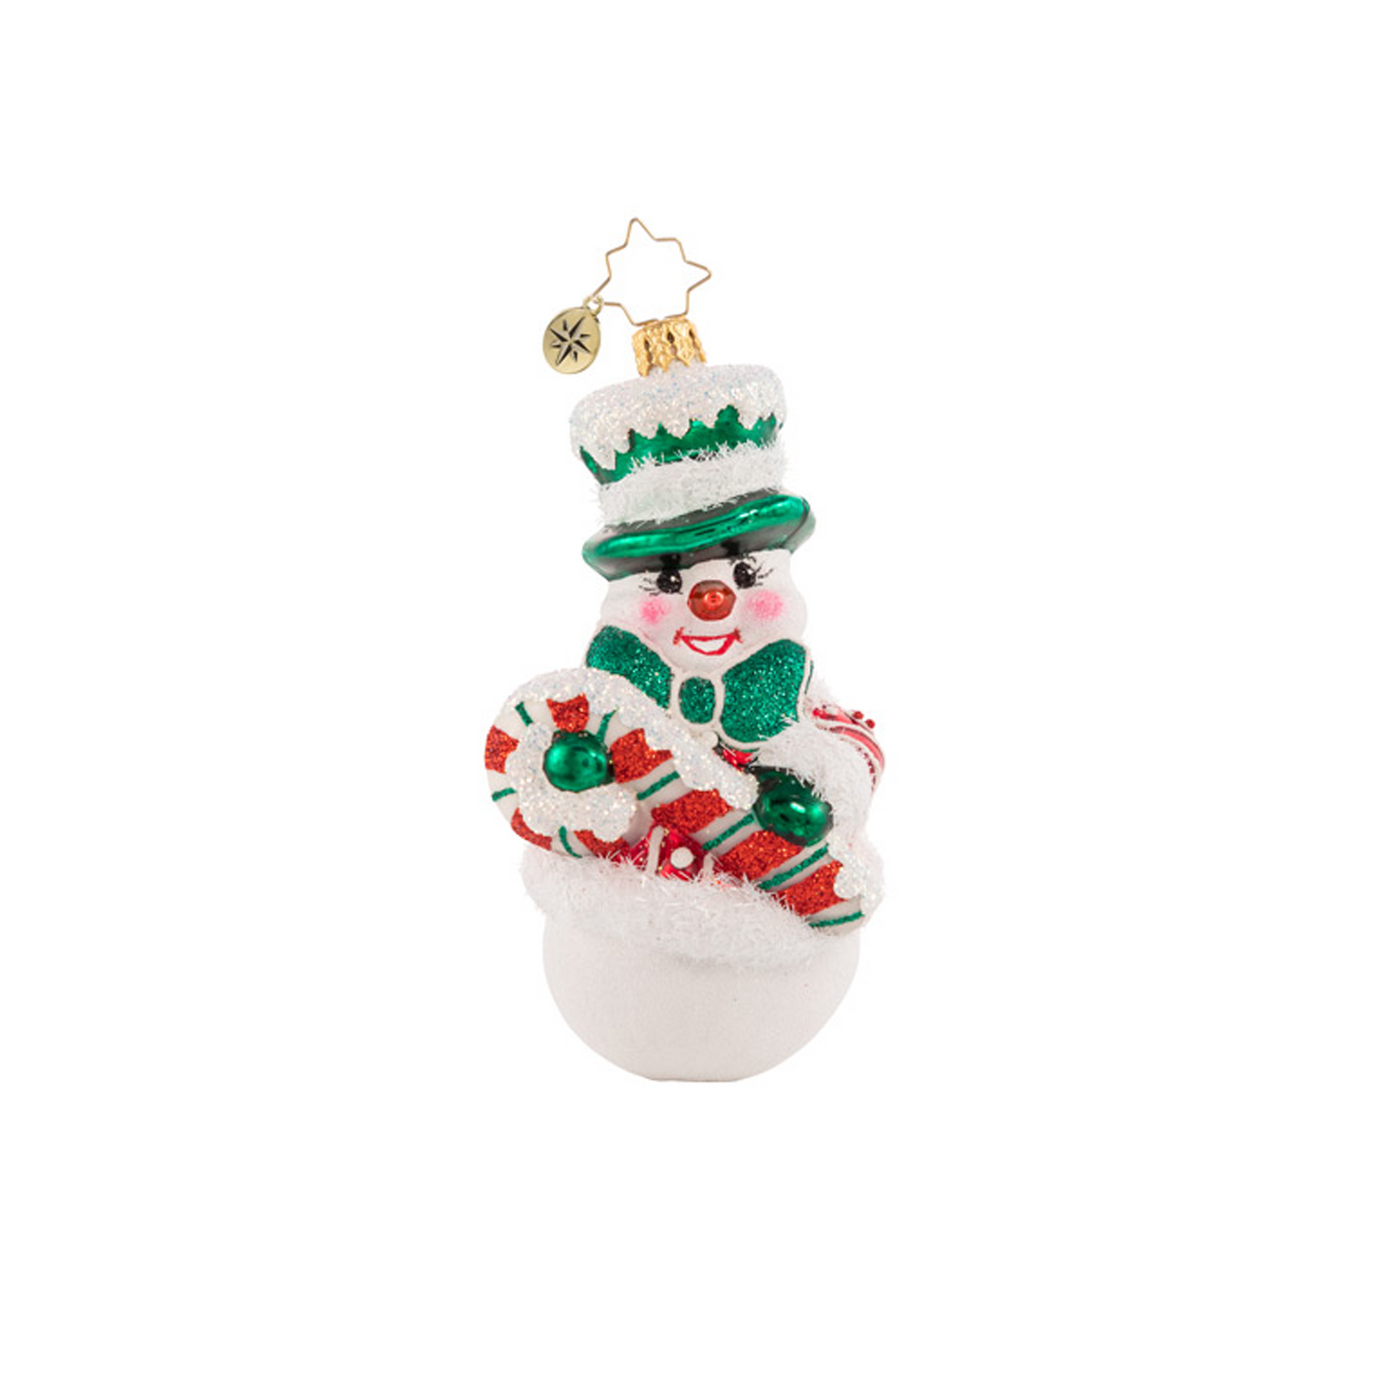 Candy Cane Entertainer Ornament